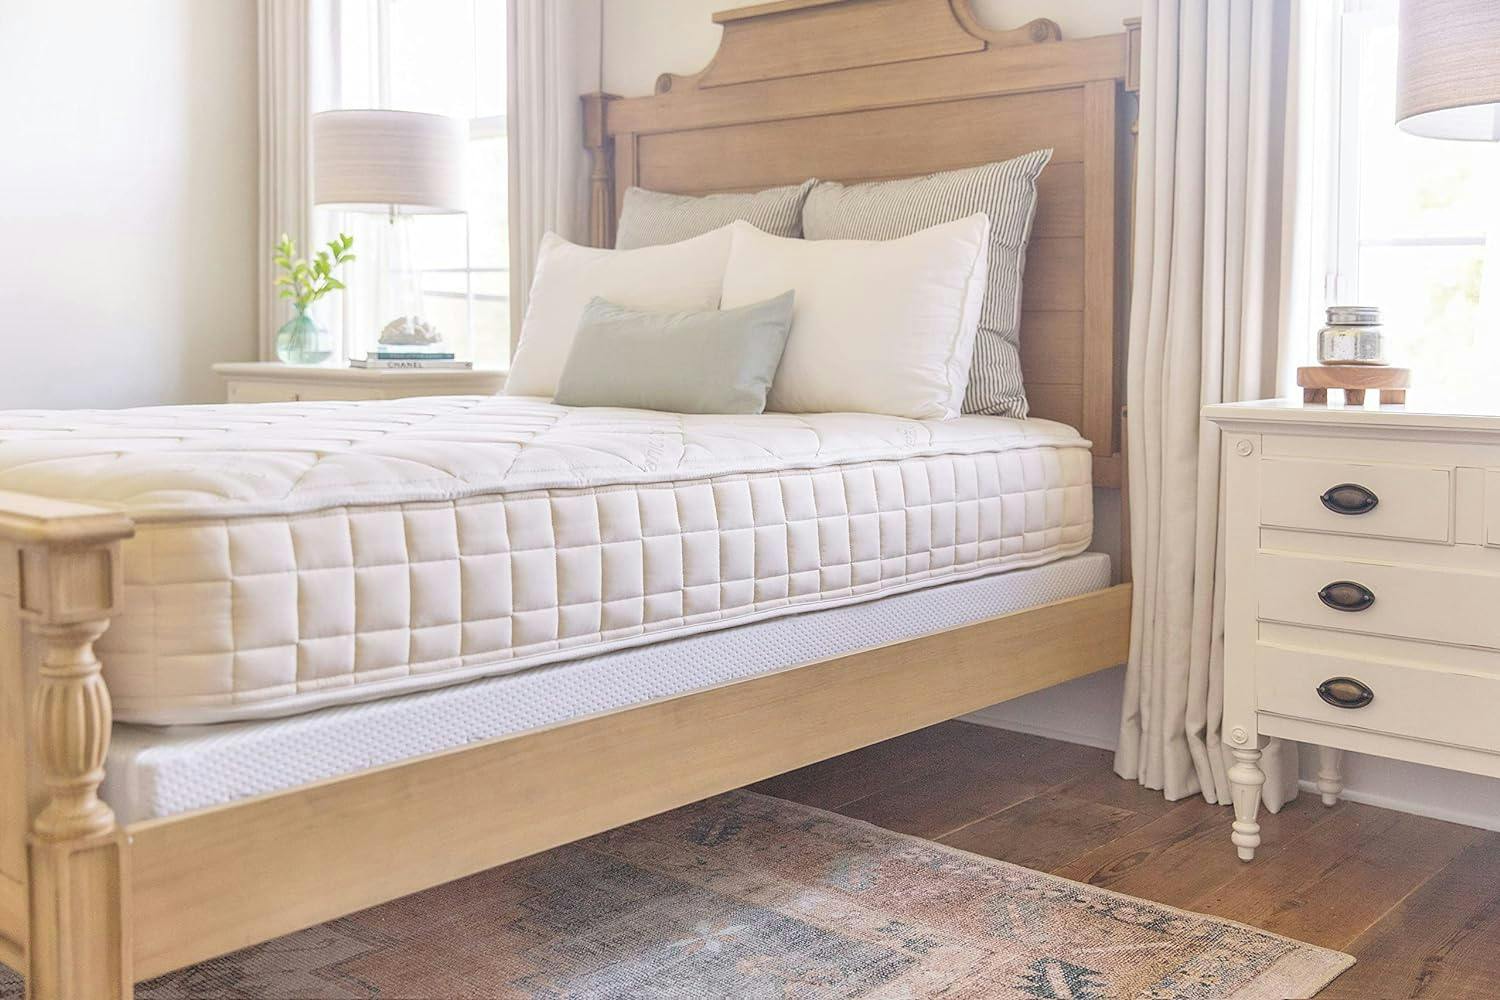 EcoLux King-Size Handcrafted Innerspring Latex Mattress